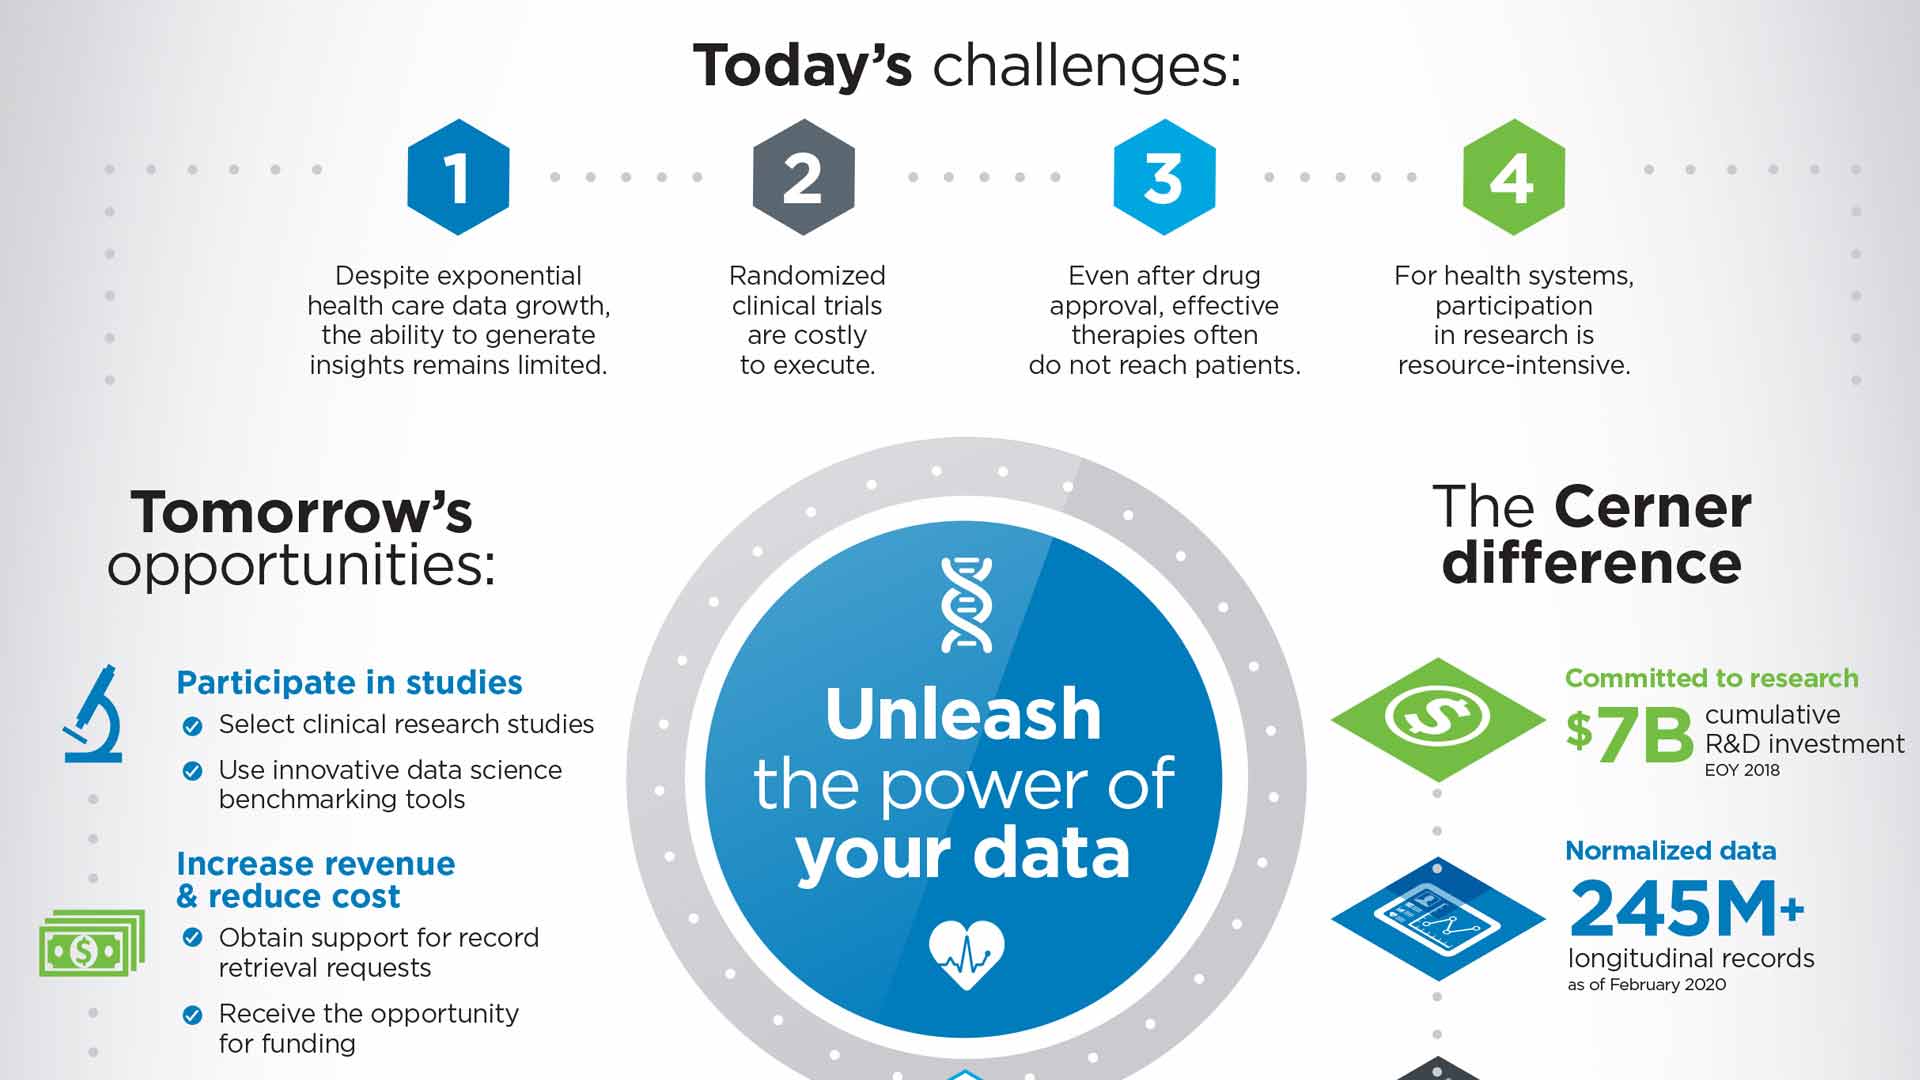 learning-health-network-infographic-image_Today's challenges infographic